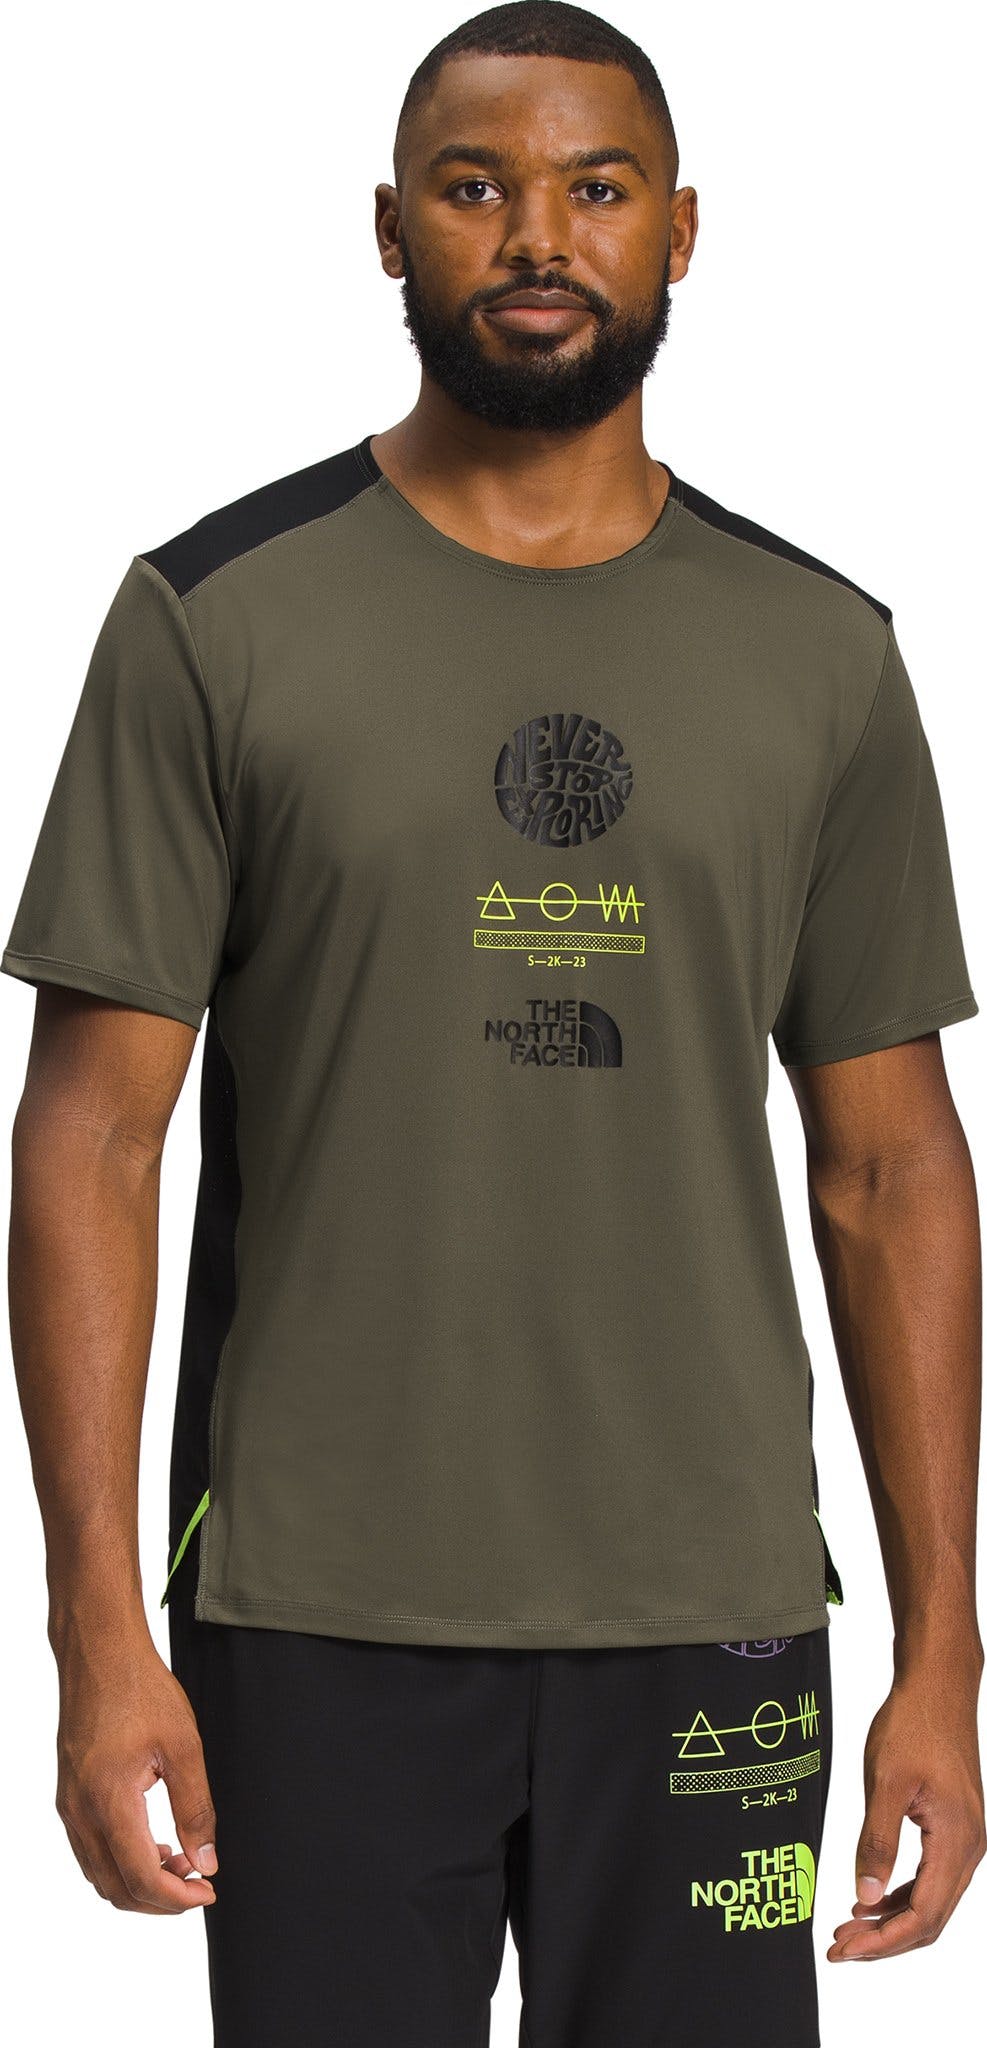 Product image for Trailwear Lost Coast Short Sleeve T-Shirt - Men's